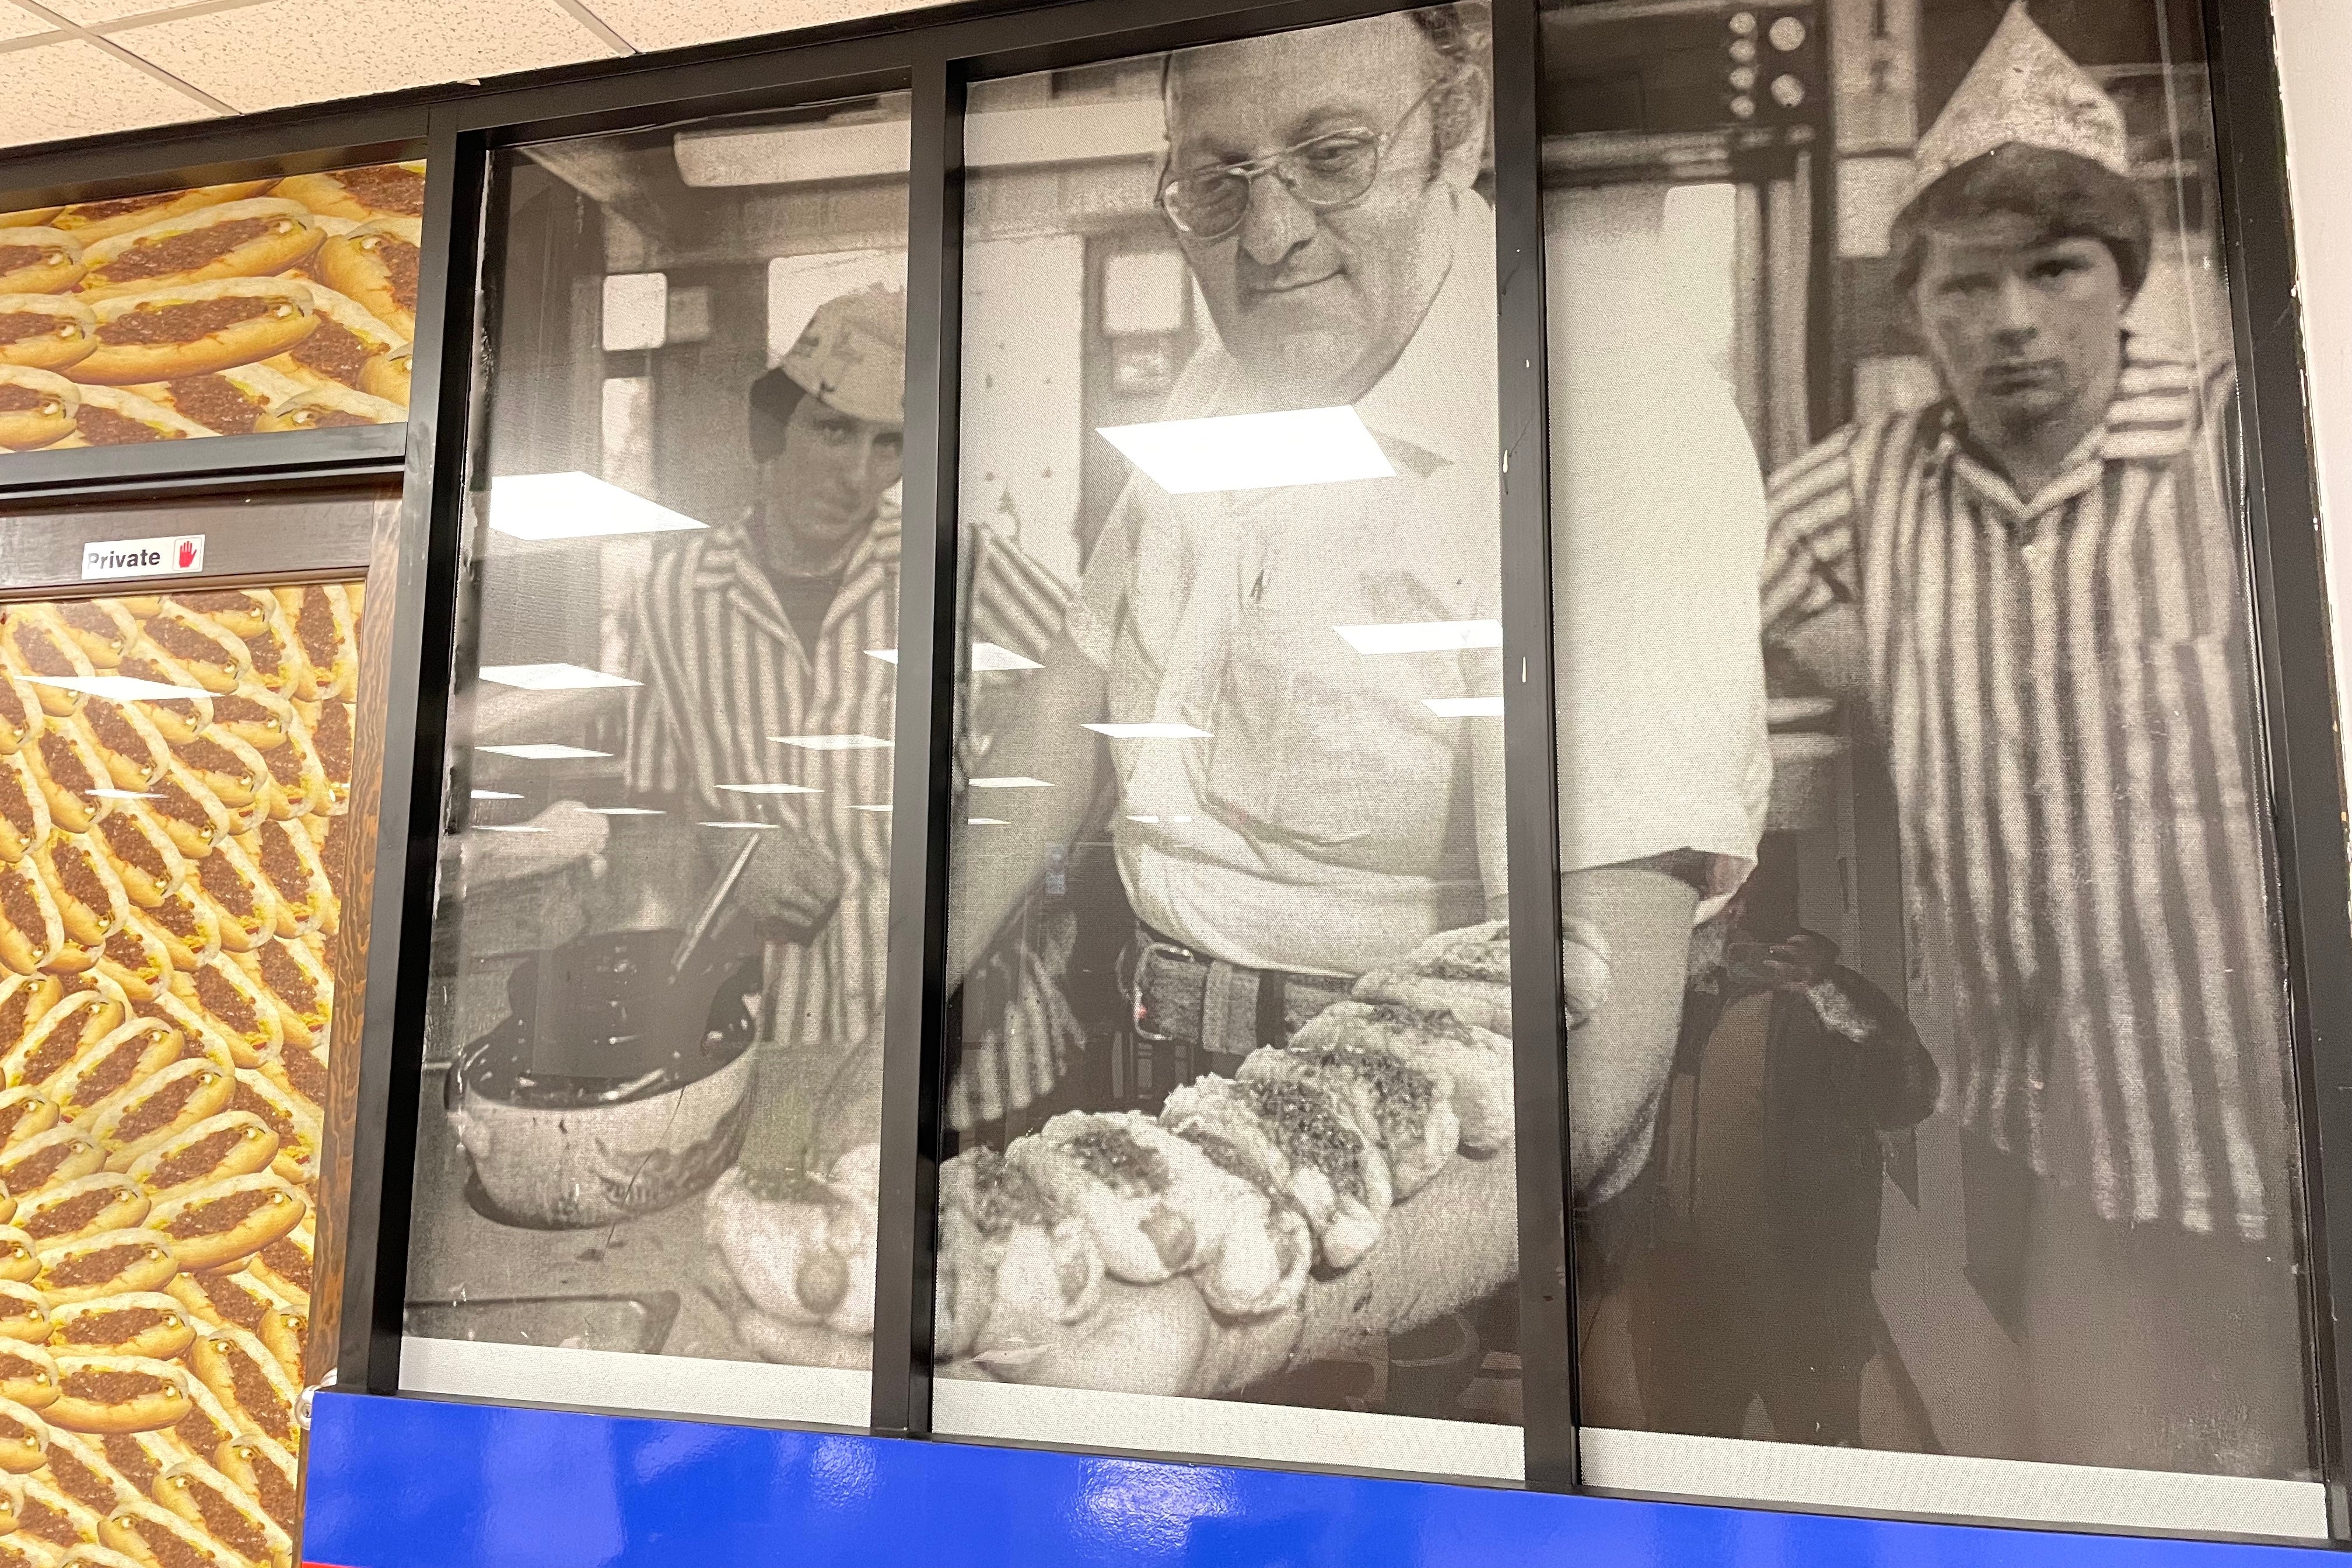 In an old black-and-white photo blown up on a restaurant wall, a man lines up mini hot dogs on his forearm.